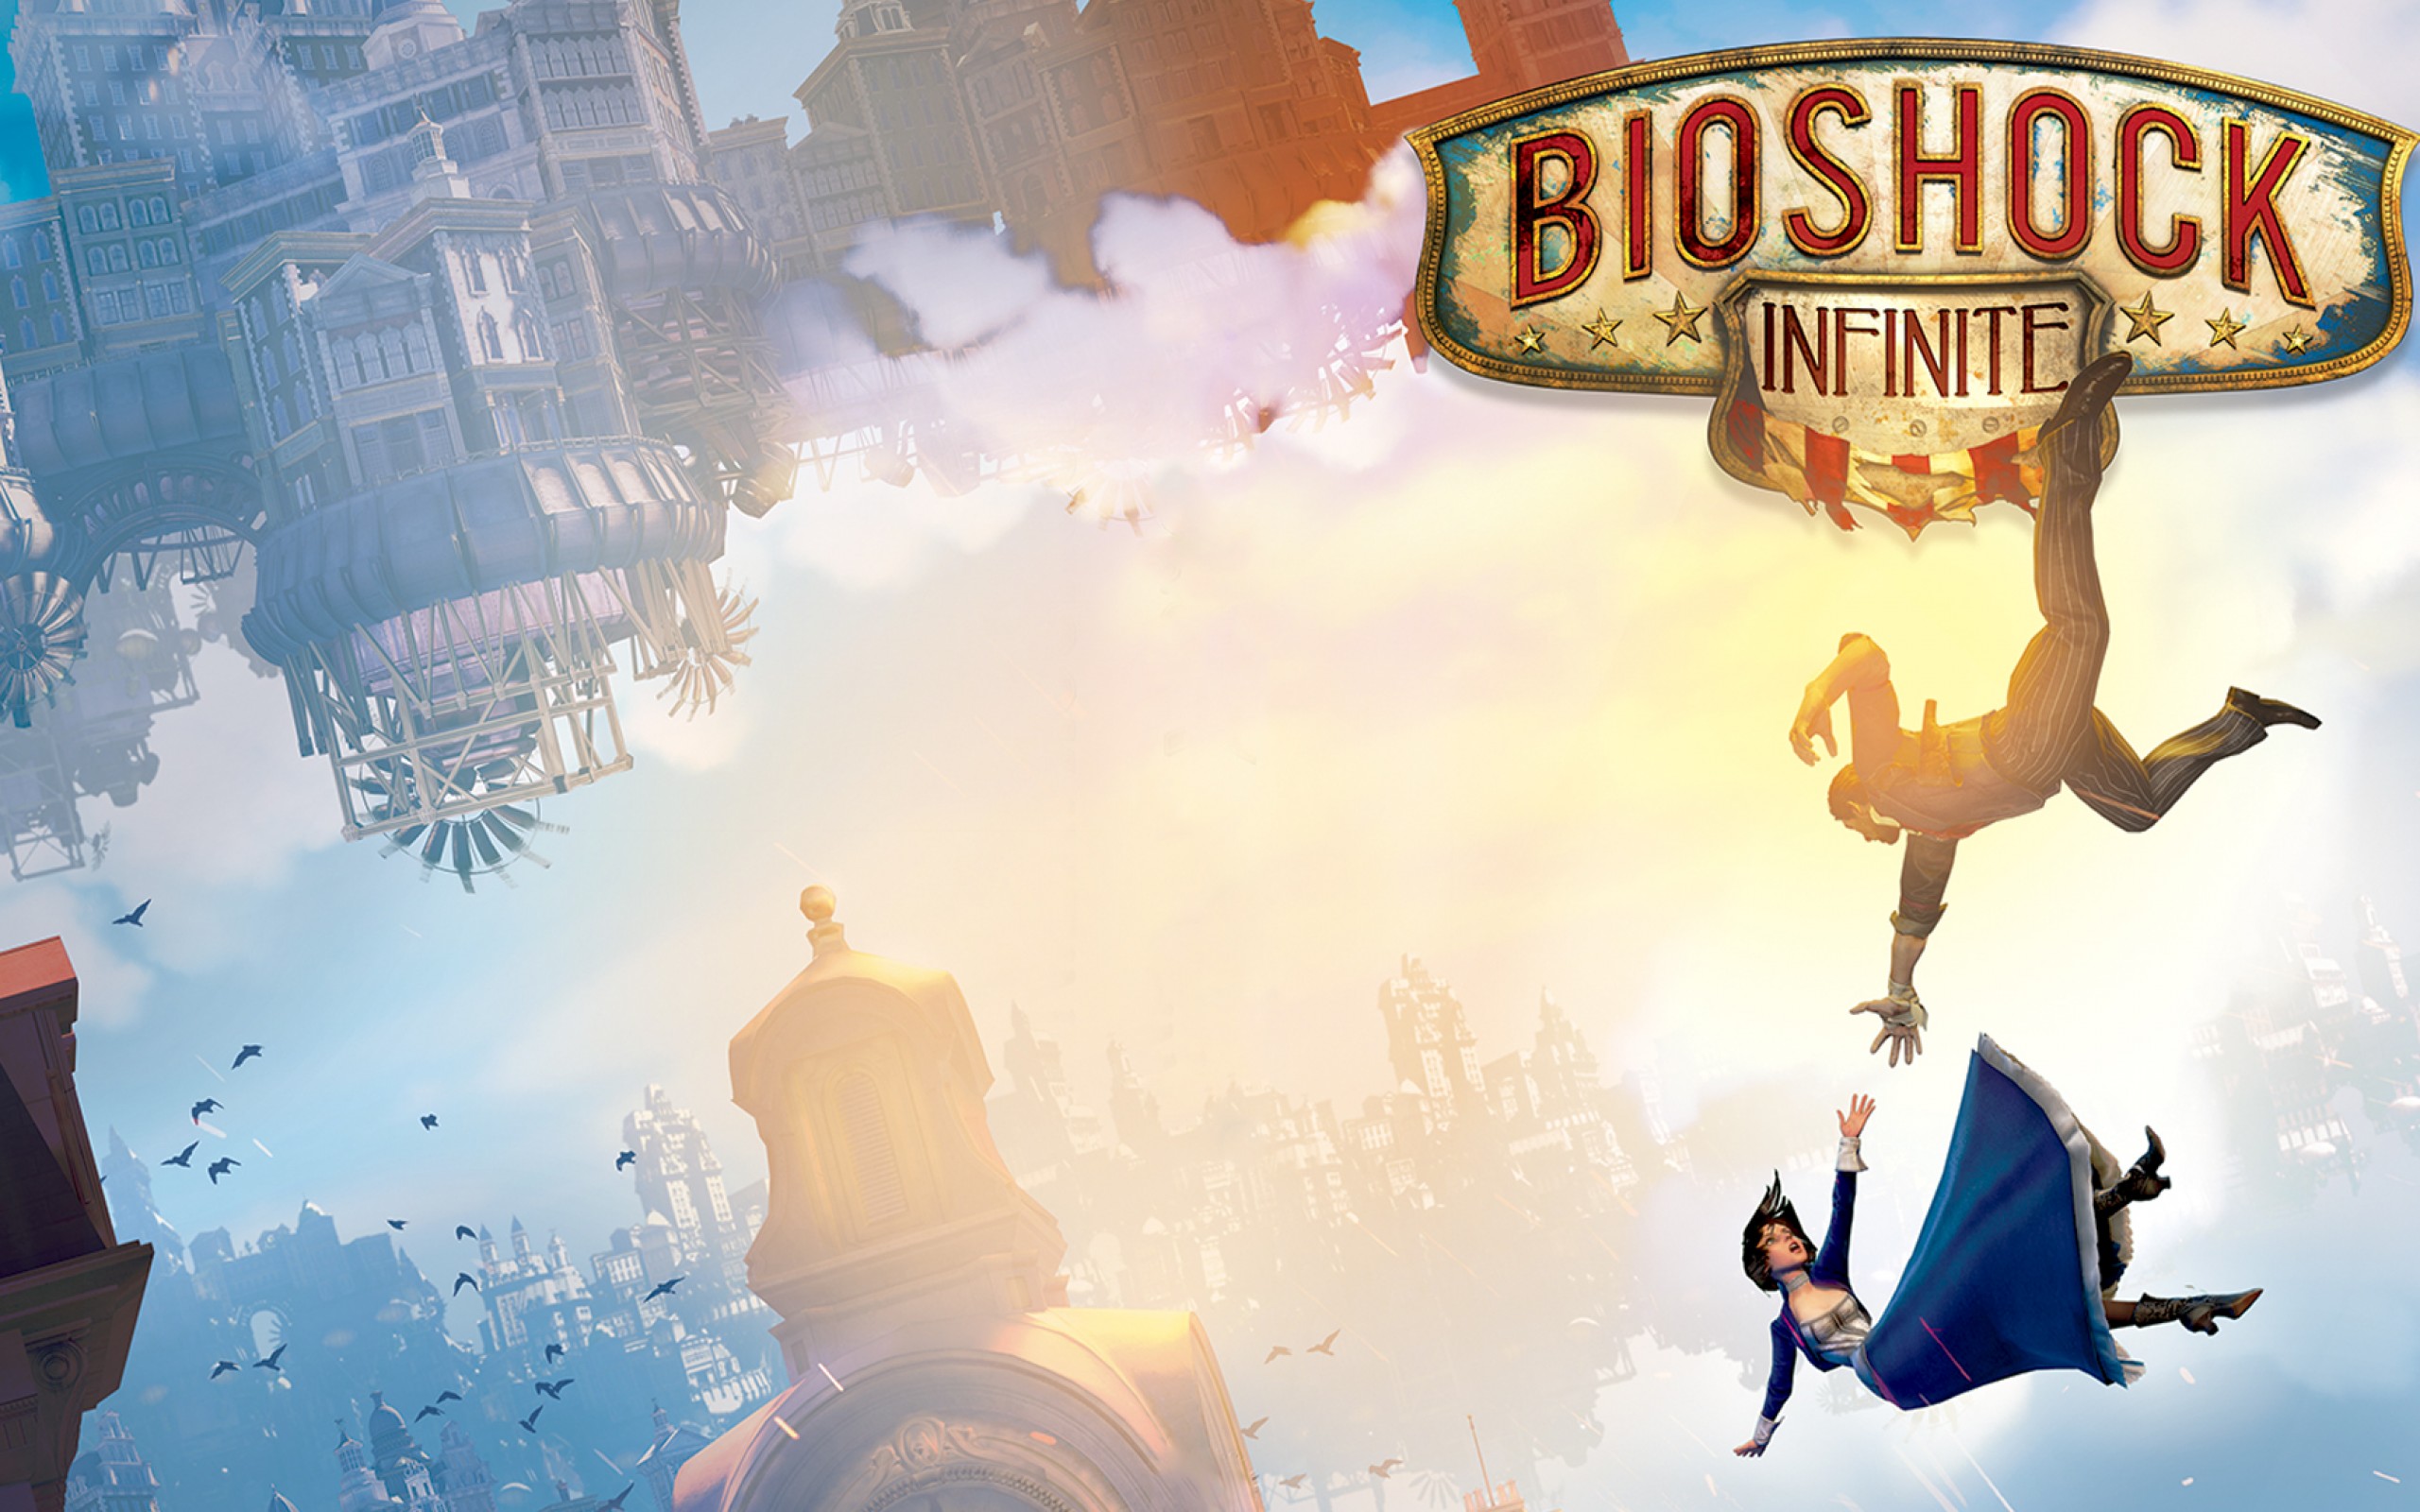 Free Download Bioshock Infinite Wallpapers Hd Full Hd Pictures 